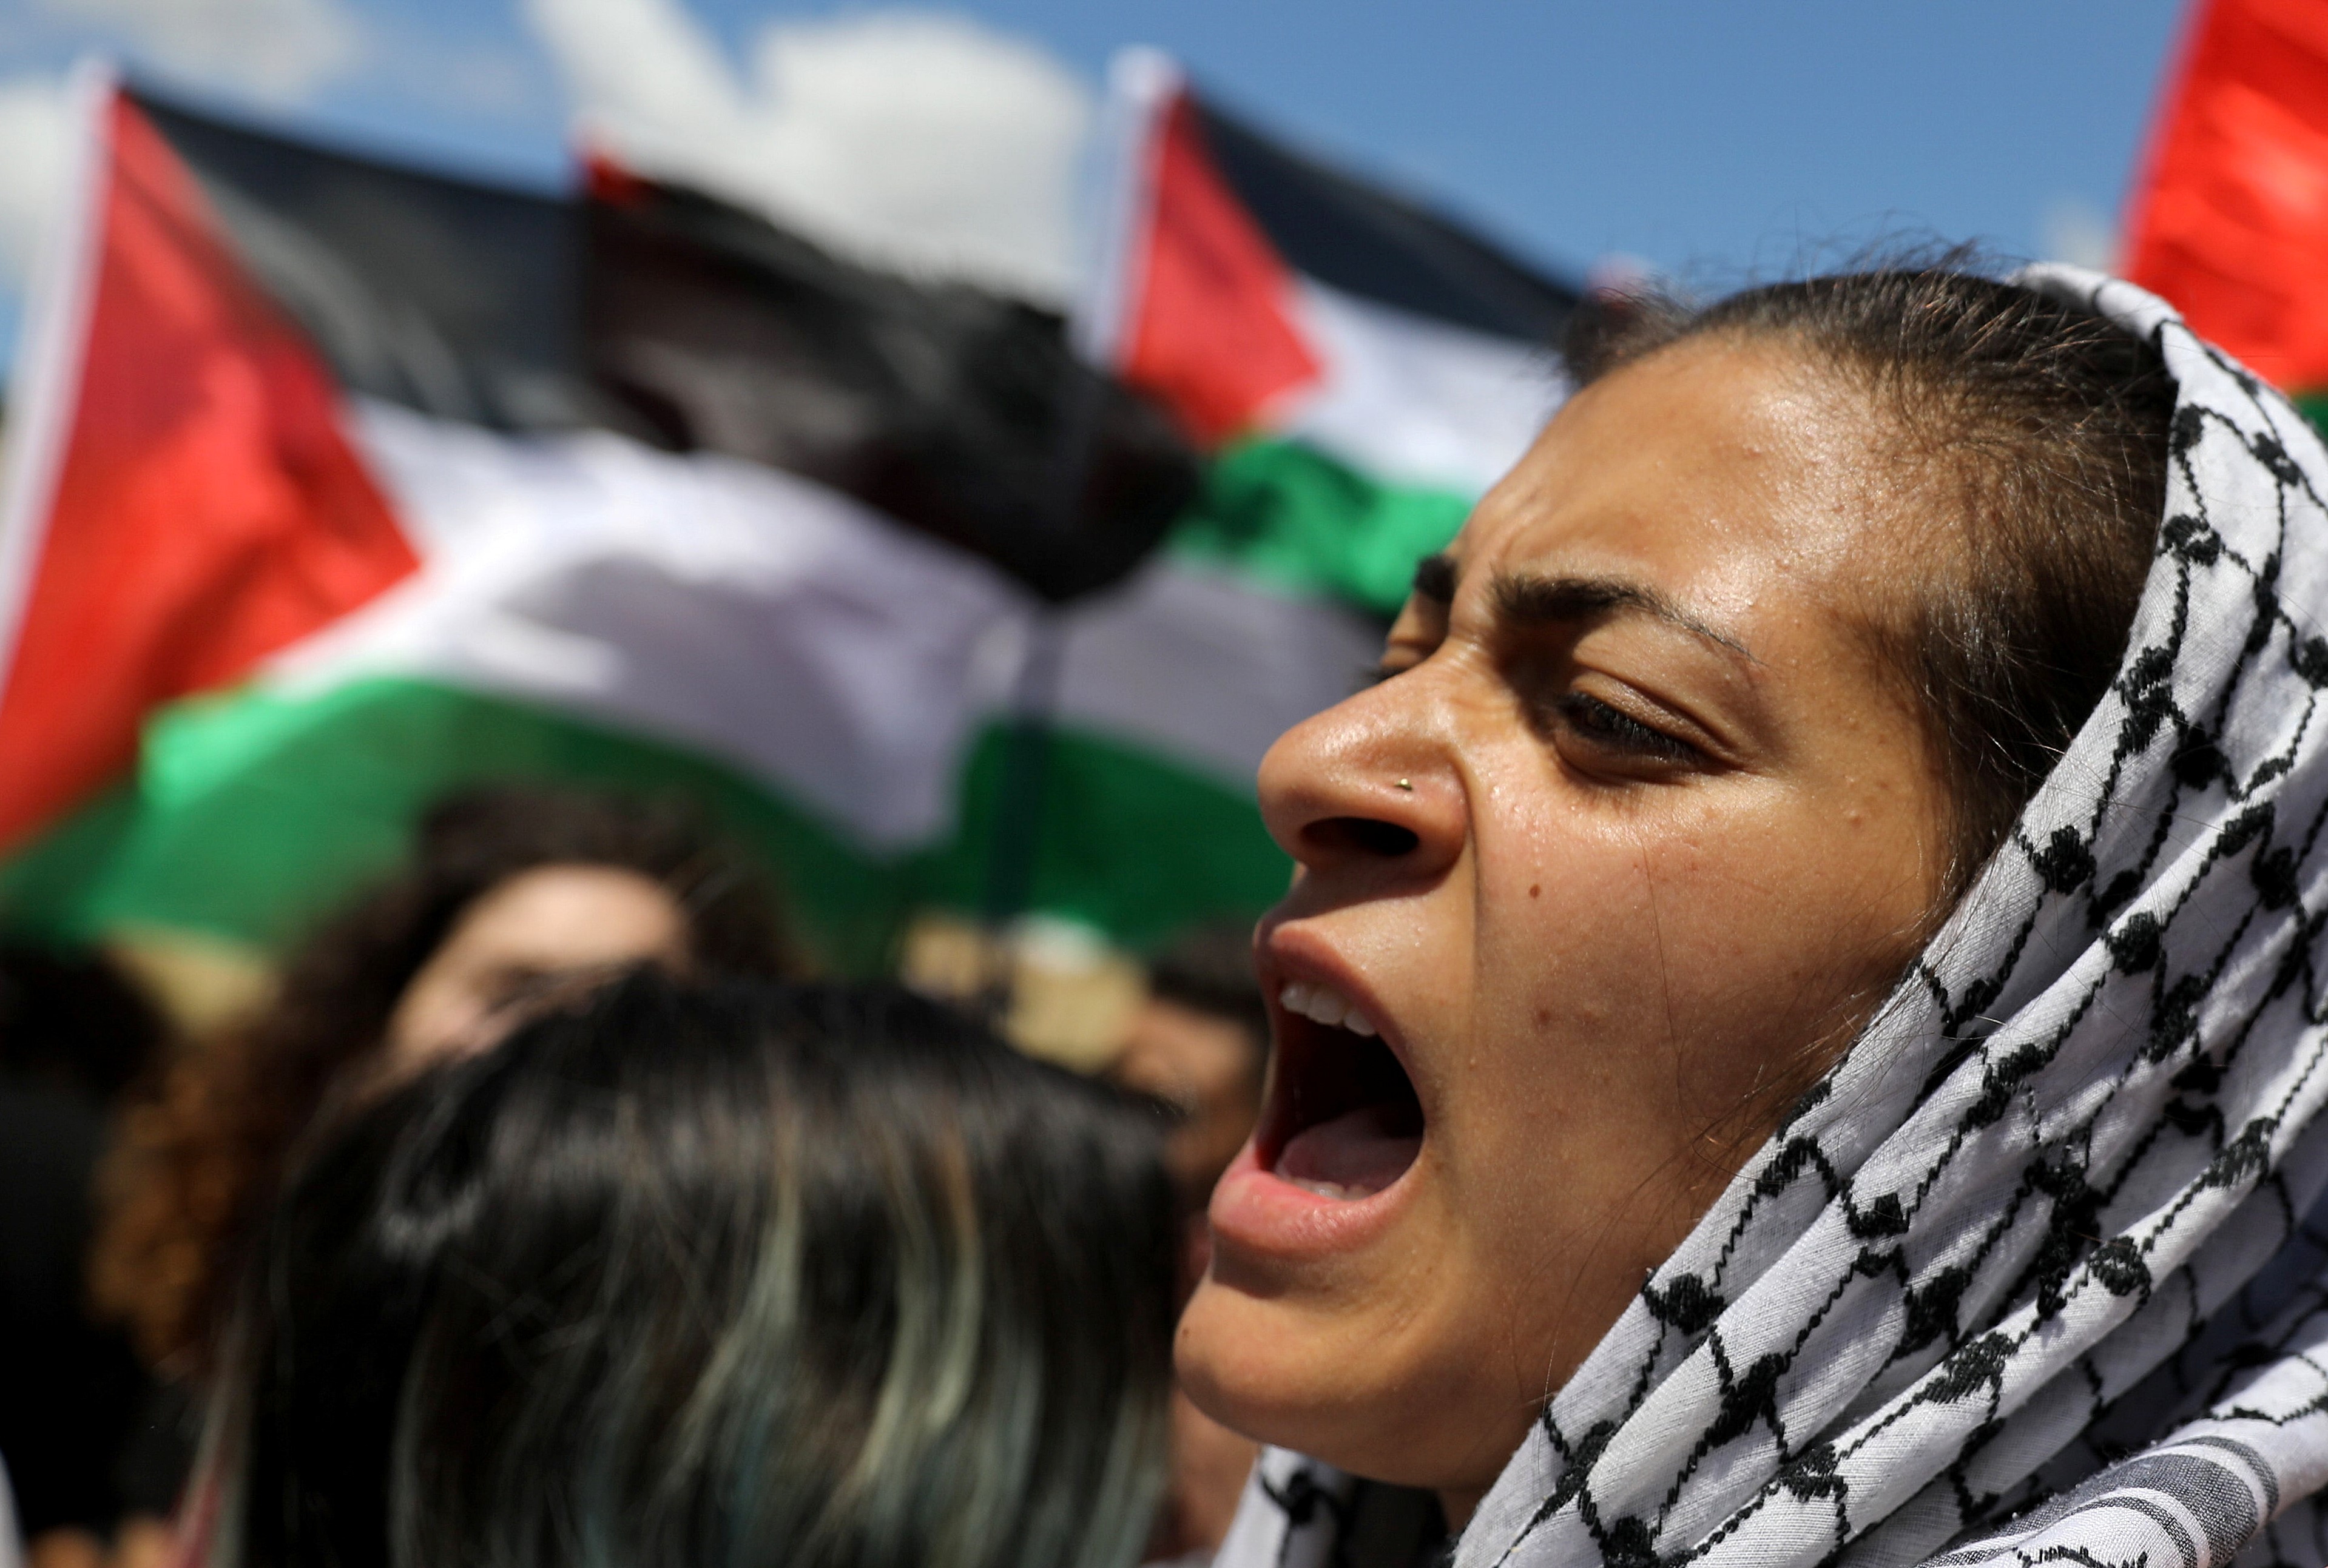 Members of Israel's Arab minority take part in a rally marking the "Nakba" or "Catastrophe", when Palestinians lament the loss of their homeland in the 1948-49 war, that caused the creation of Israel, near the abandoned village of Khubbayza, northern Israel May 9, 2019. 